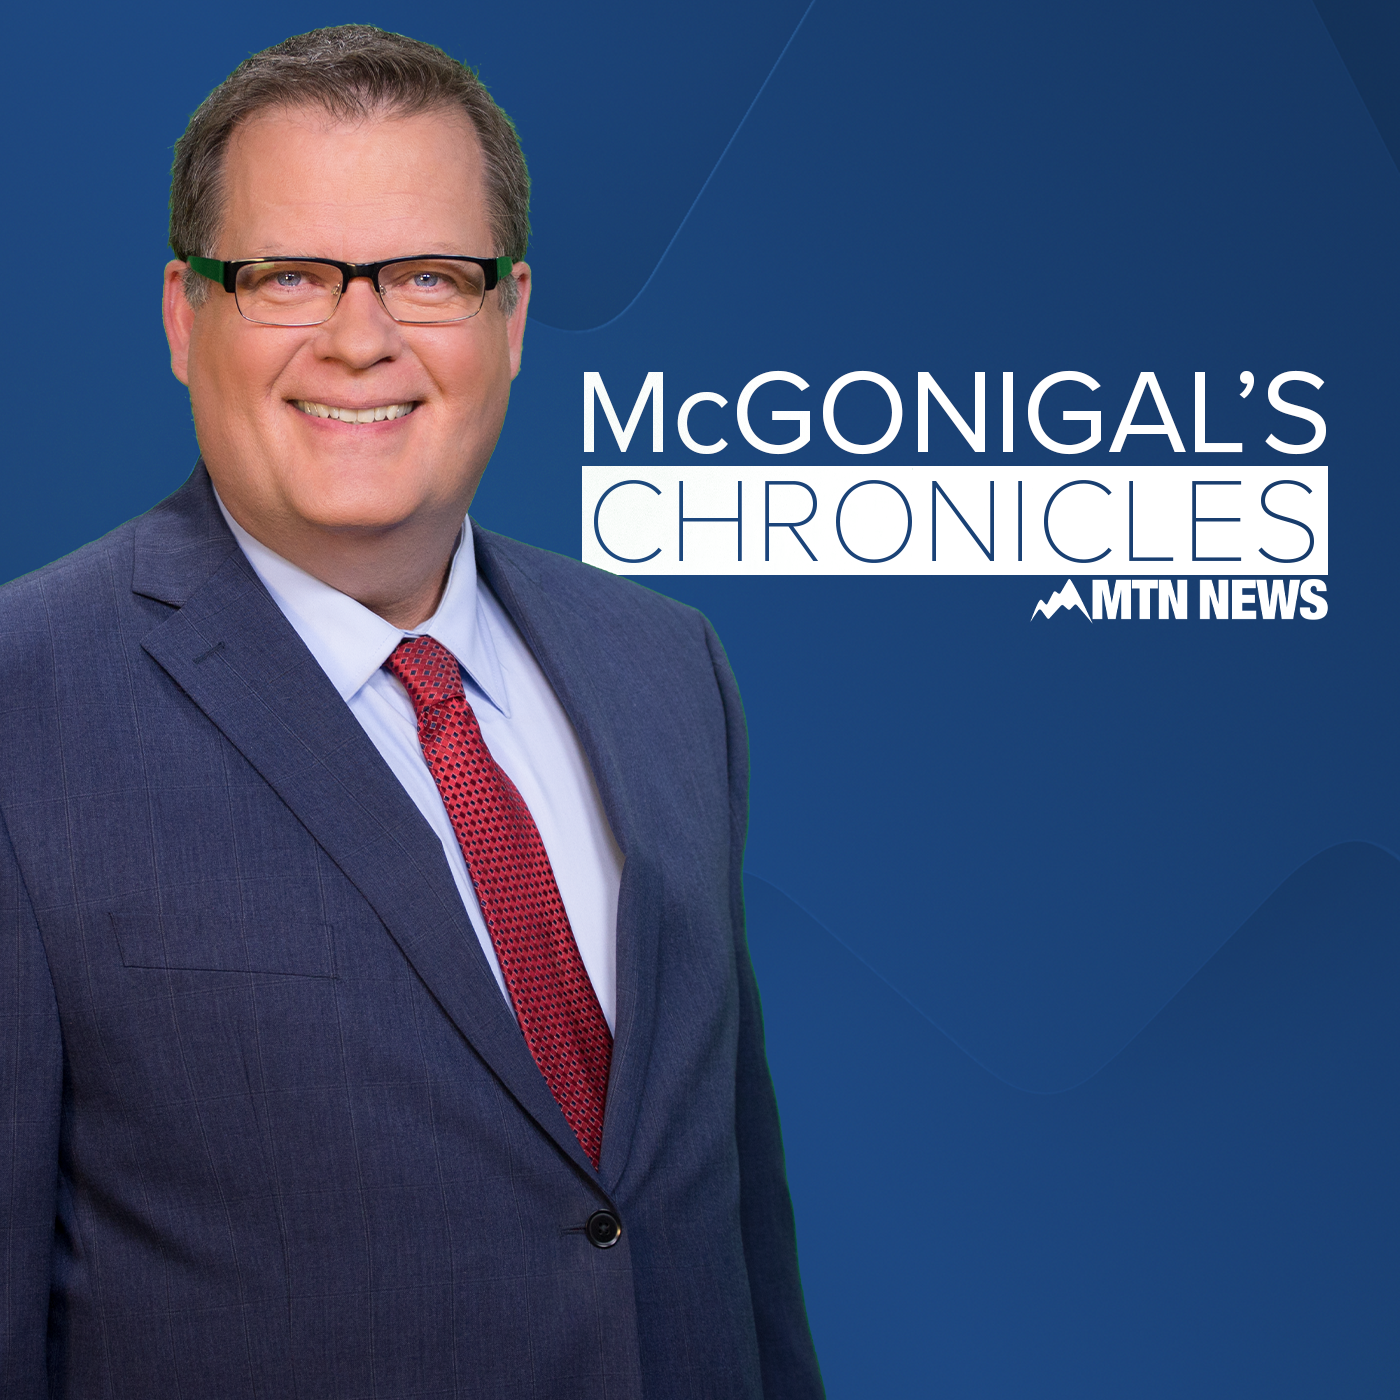 McGonigal's Chronicles: The CJ